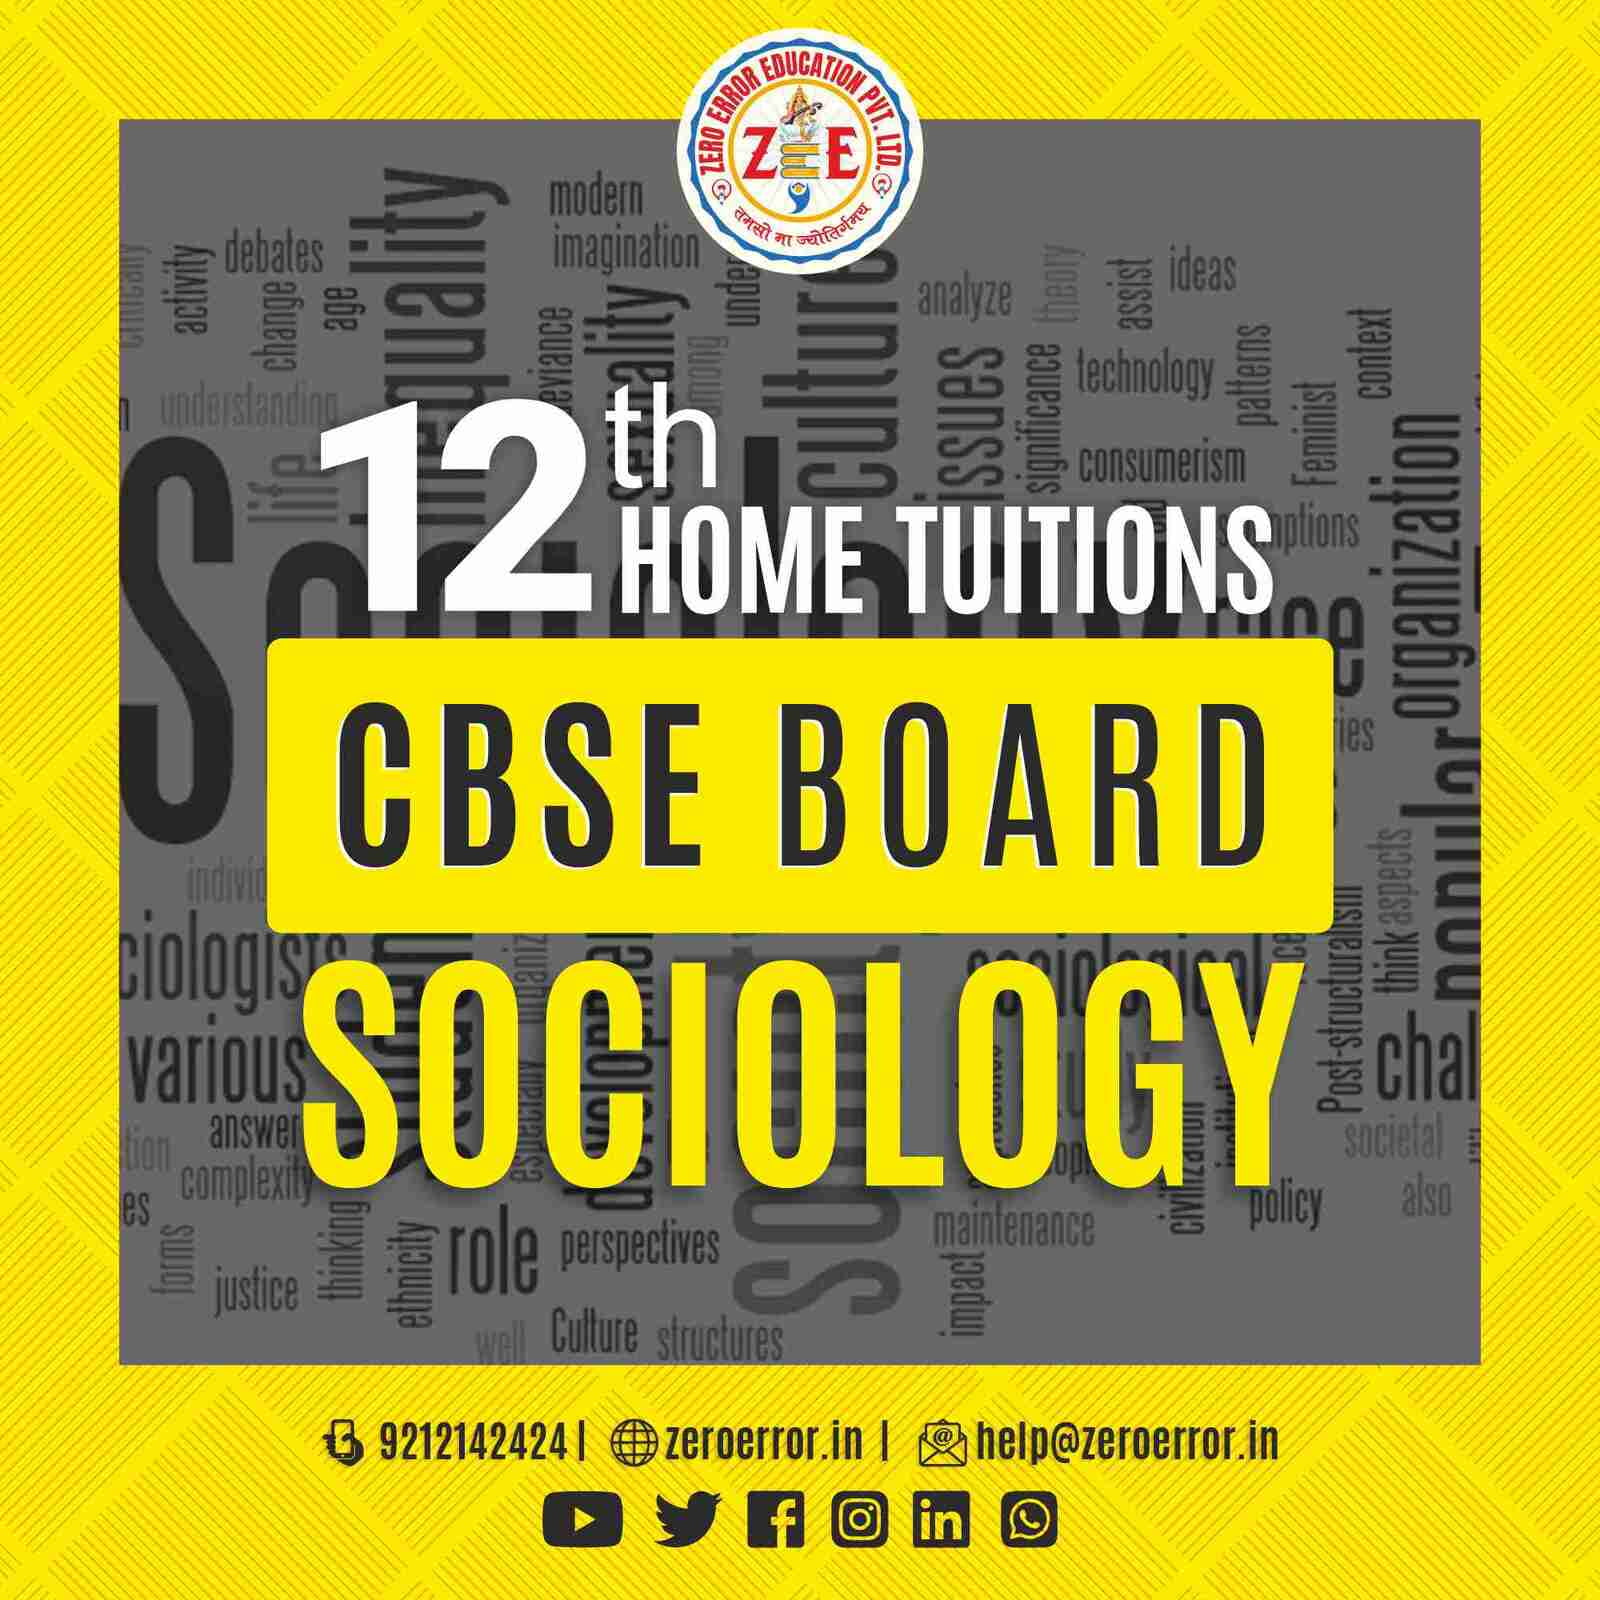 12th Grade CBSE Sociology Online Classes by Zero Error Education Prepare for your CBSE board exams with online and offline Sociology classes for 12th grade. Learn from experienced home tutors and get all the help you need to succeed. Enroll today at Zero Error Education. [https://zeroerror.in/] Call 9212142424 for more information.